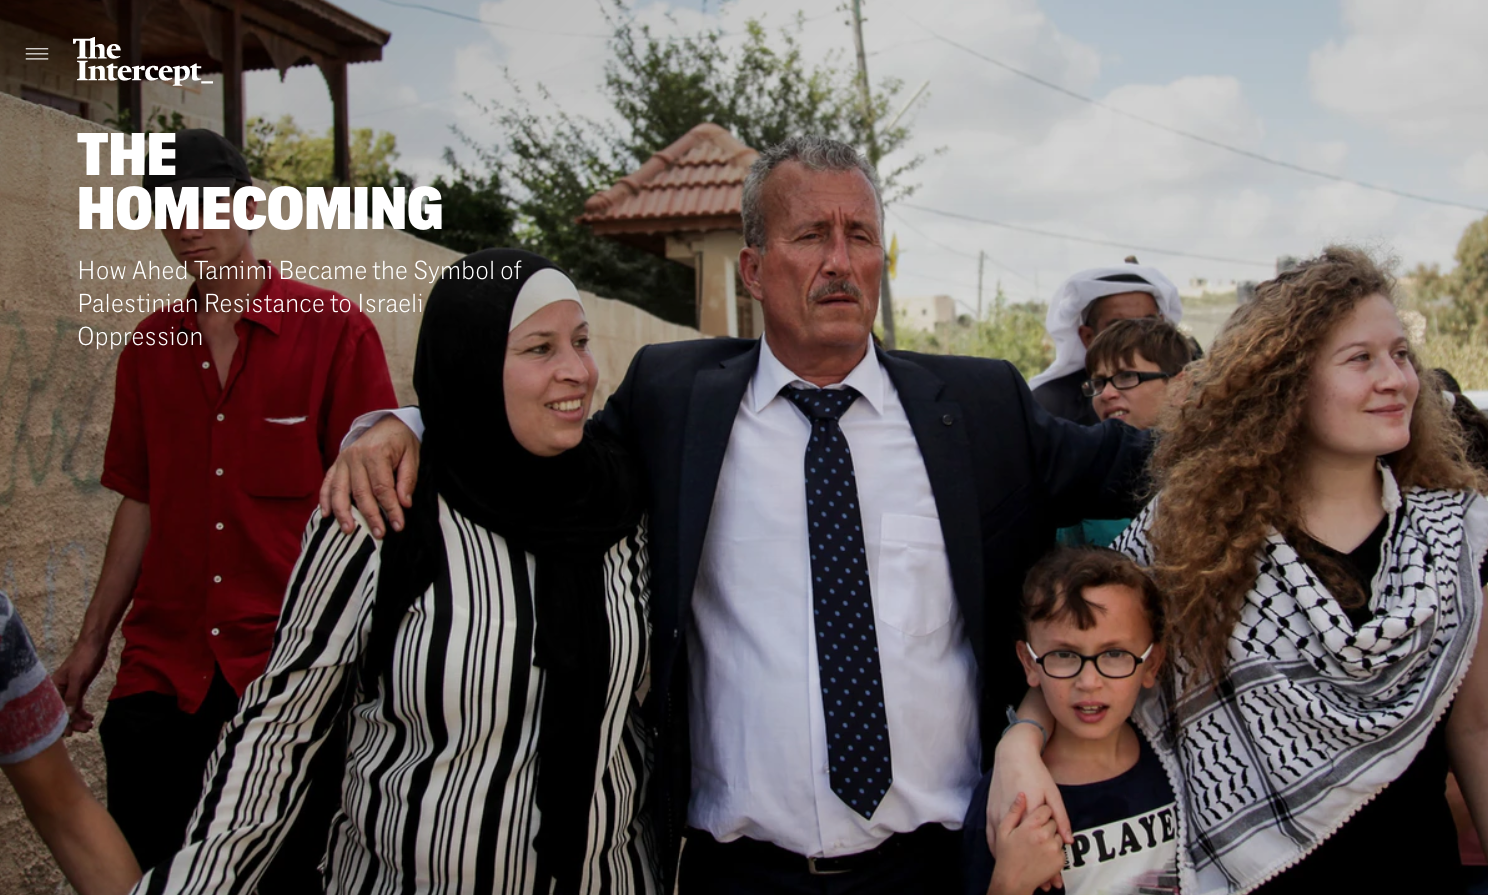  Photography: Samar Hazboun  Photo Editing: Ariel Zambelich  Story:  How Ahed Tamimi Became the Symbol of Palestinian Resistance to Israeli Oppression  